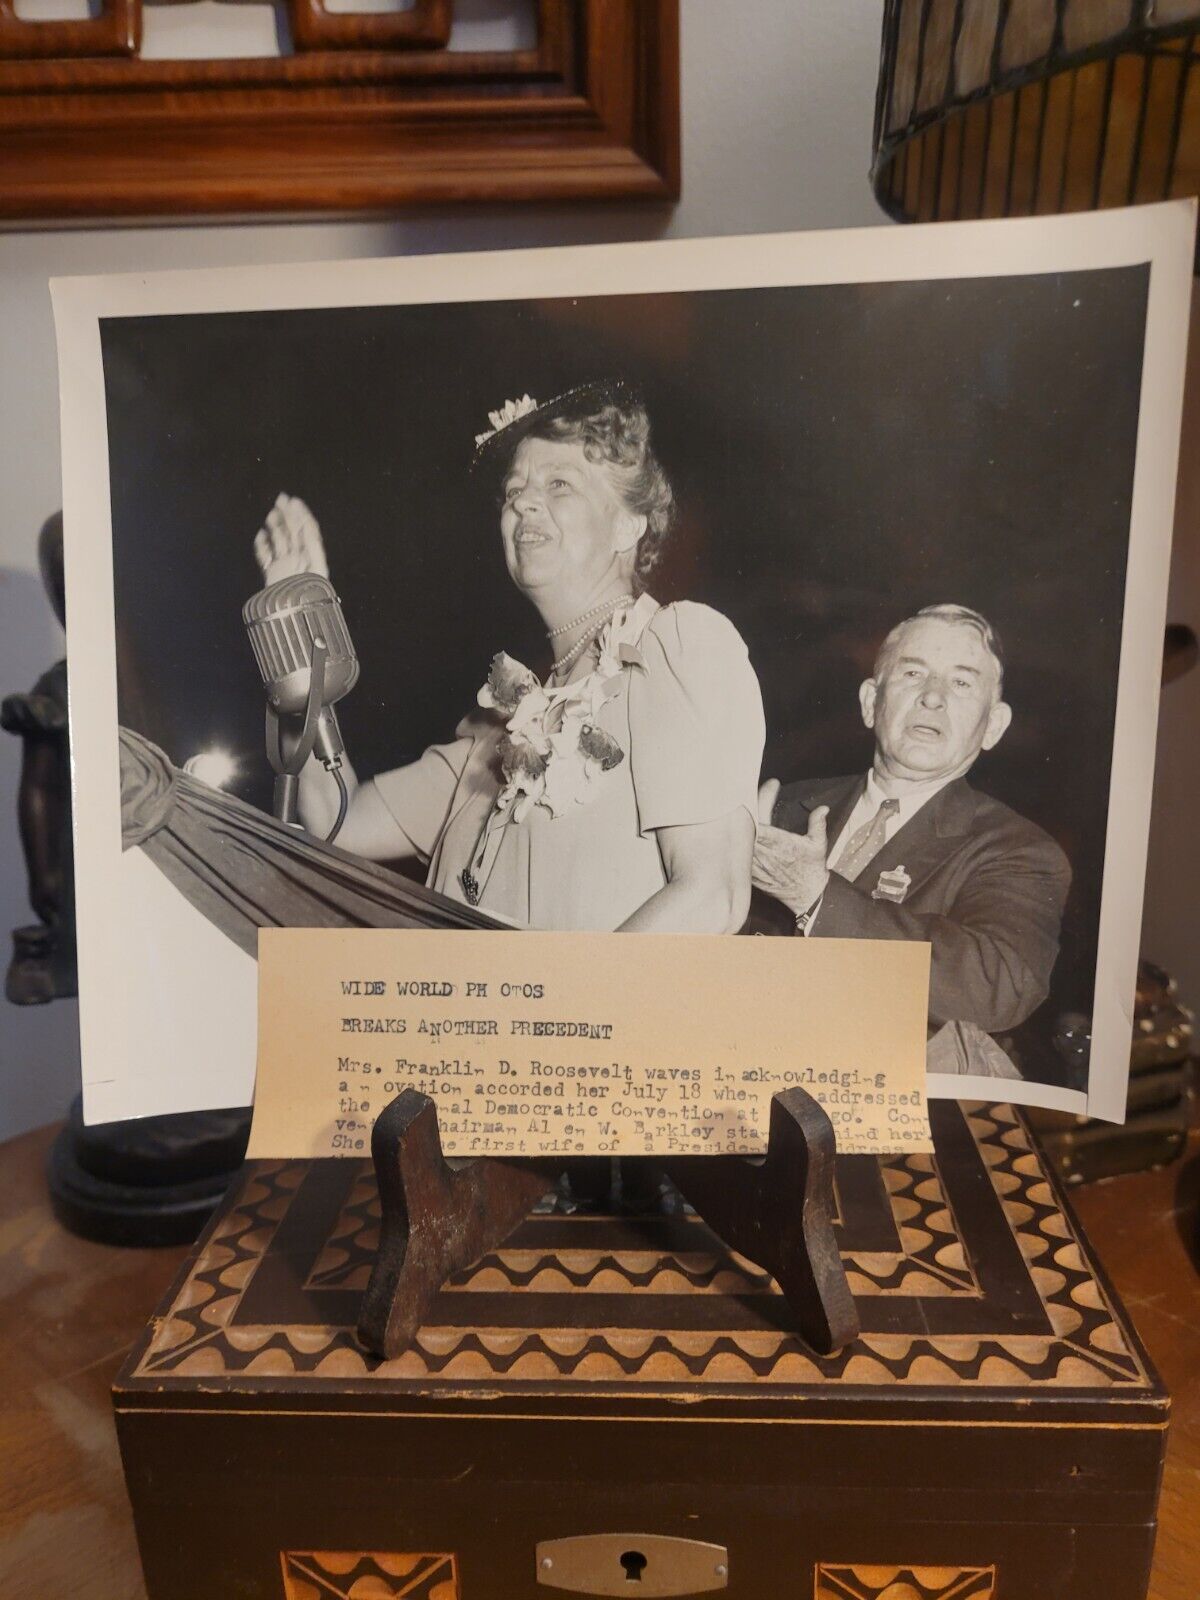 Vintage 1940 Press Photo Of First Lady Eleanor Roosevelt Waves To People 